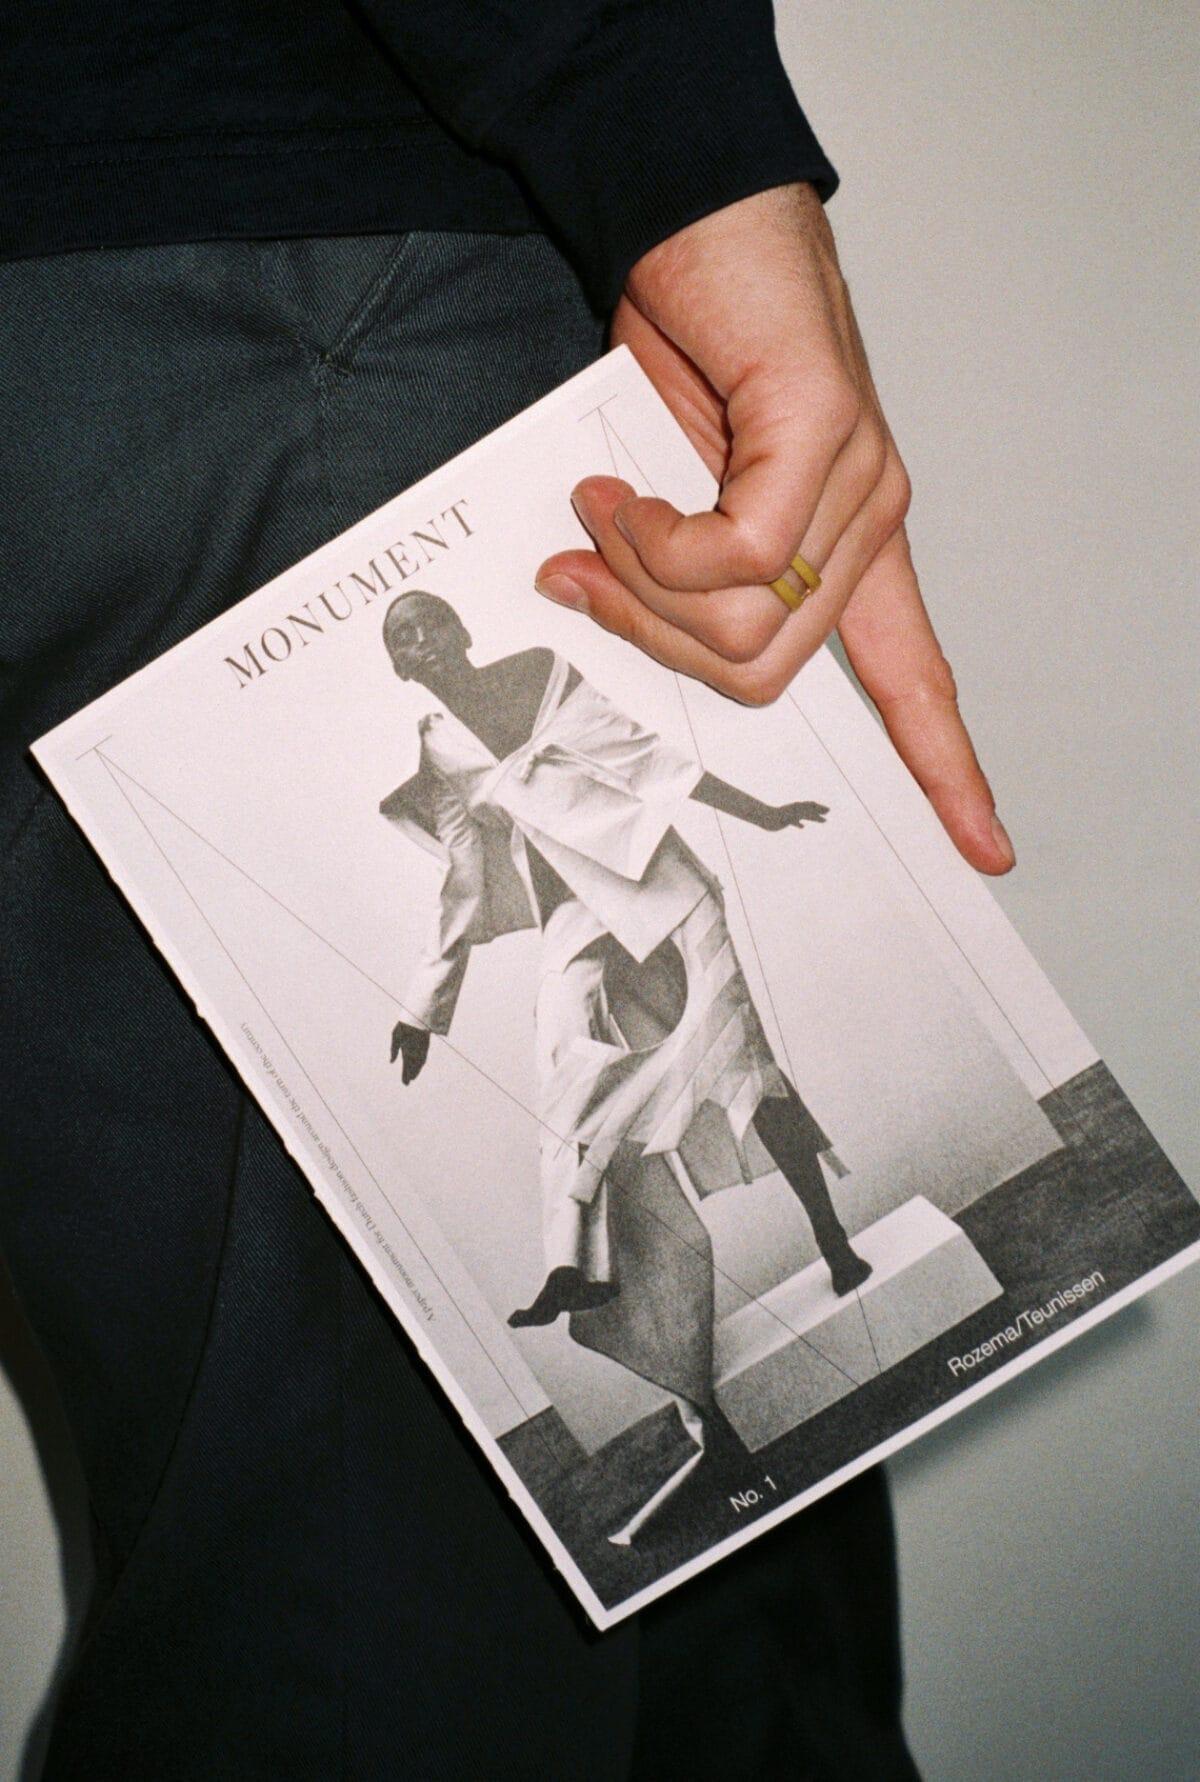 Monument Issue #1 | Rozema/Teunissen (2018). Photography: Anouk Beckers.